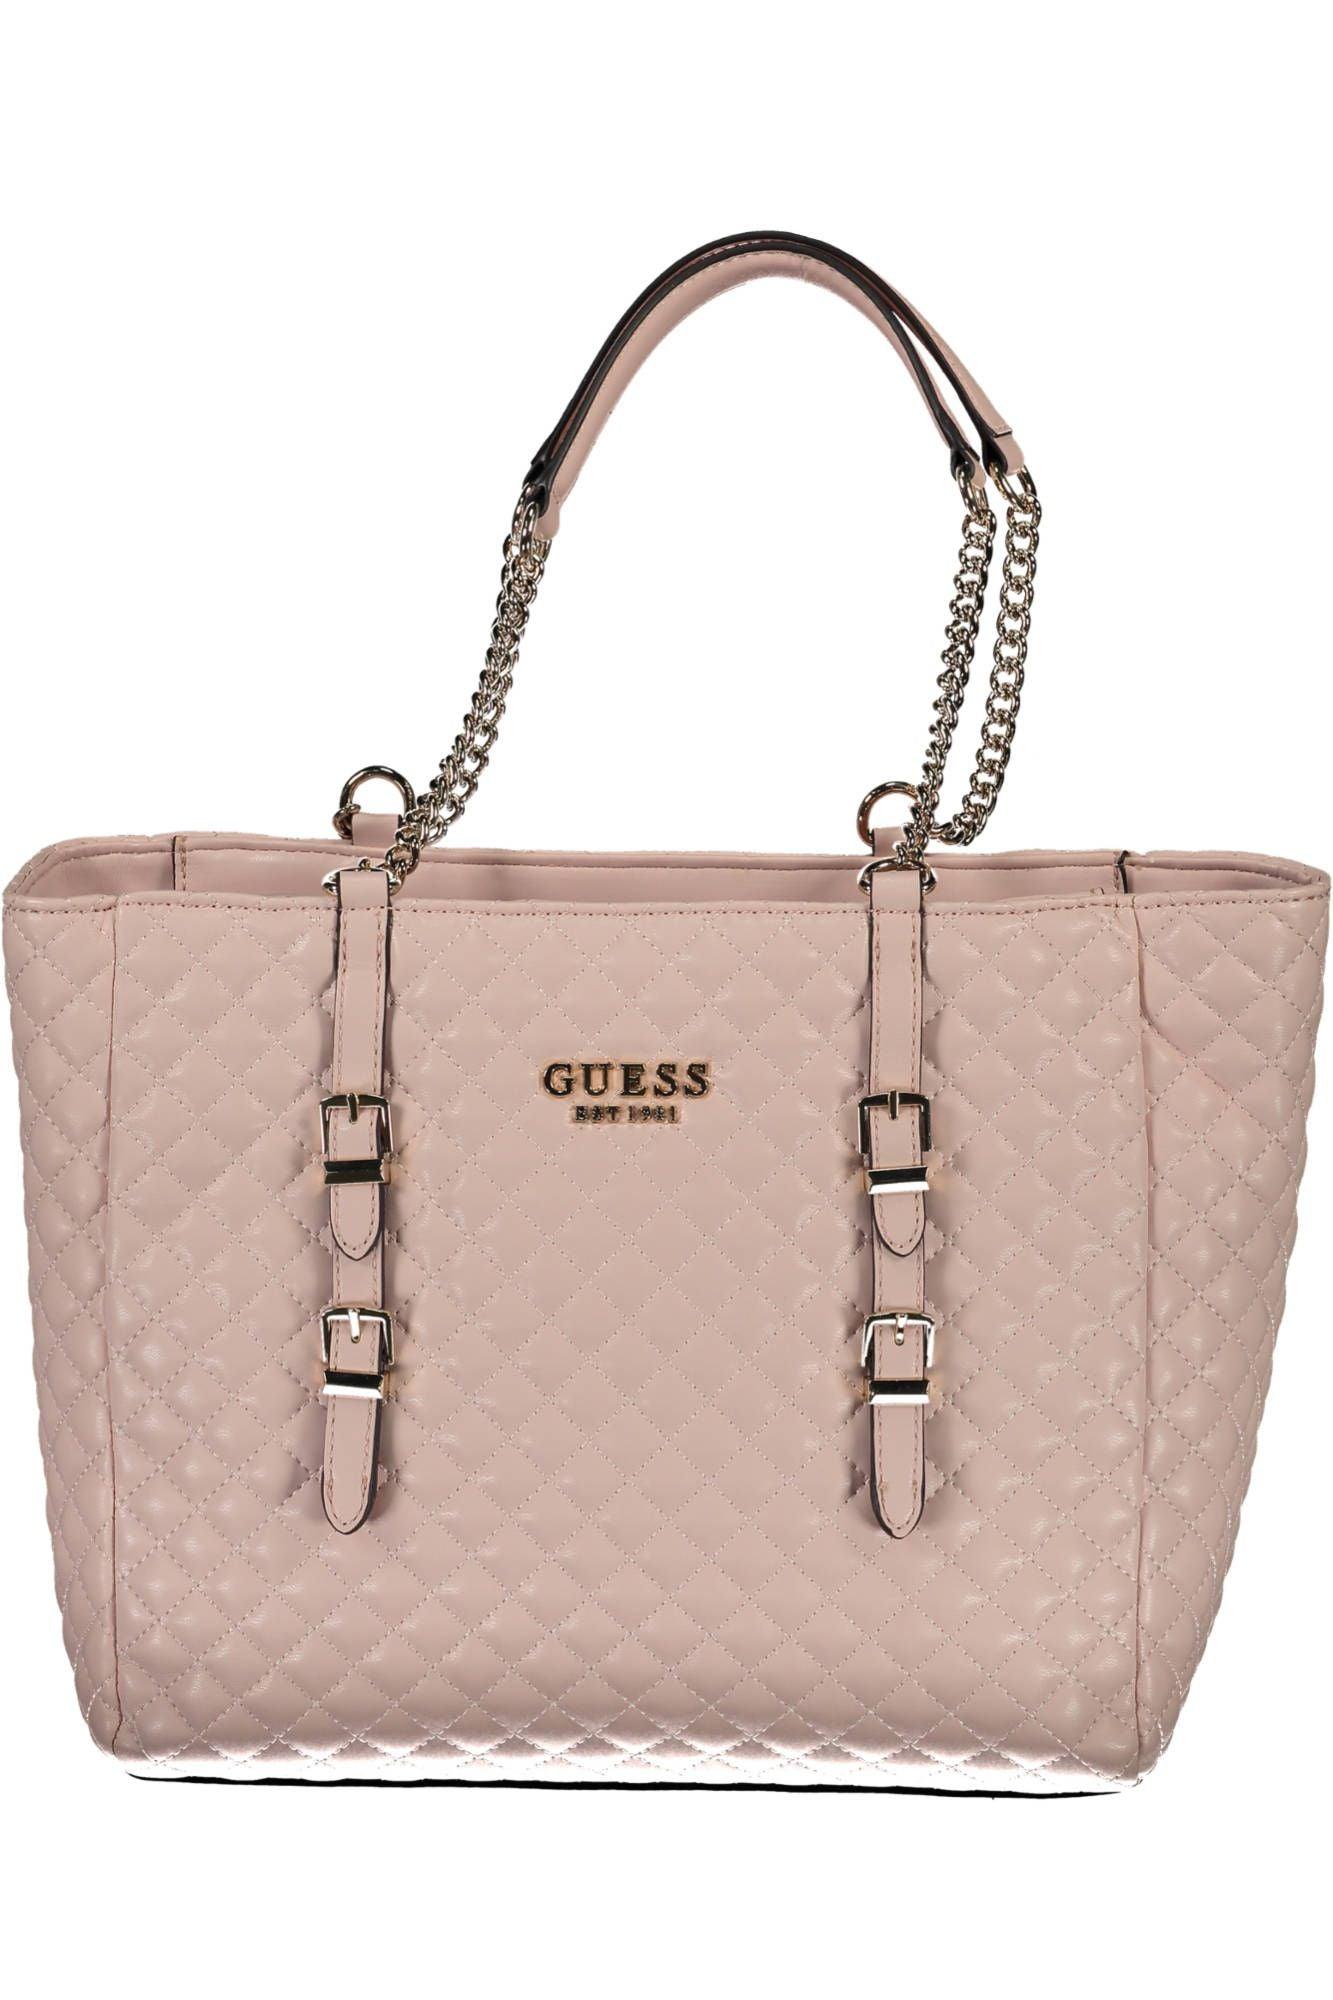 Guess Jeans Chic Pink Chain-Handle Shoulder Bag - PER.FASHION